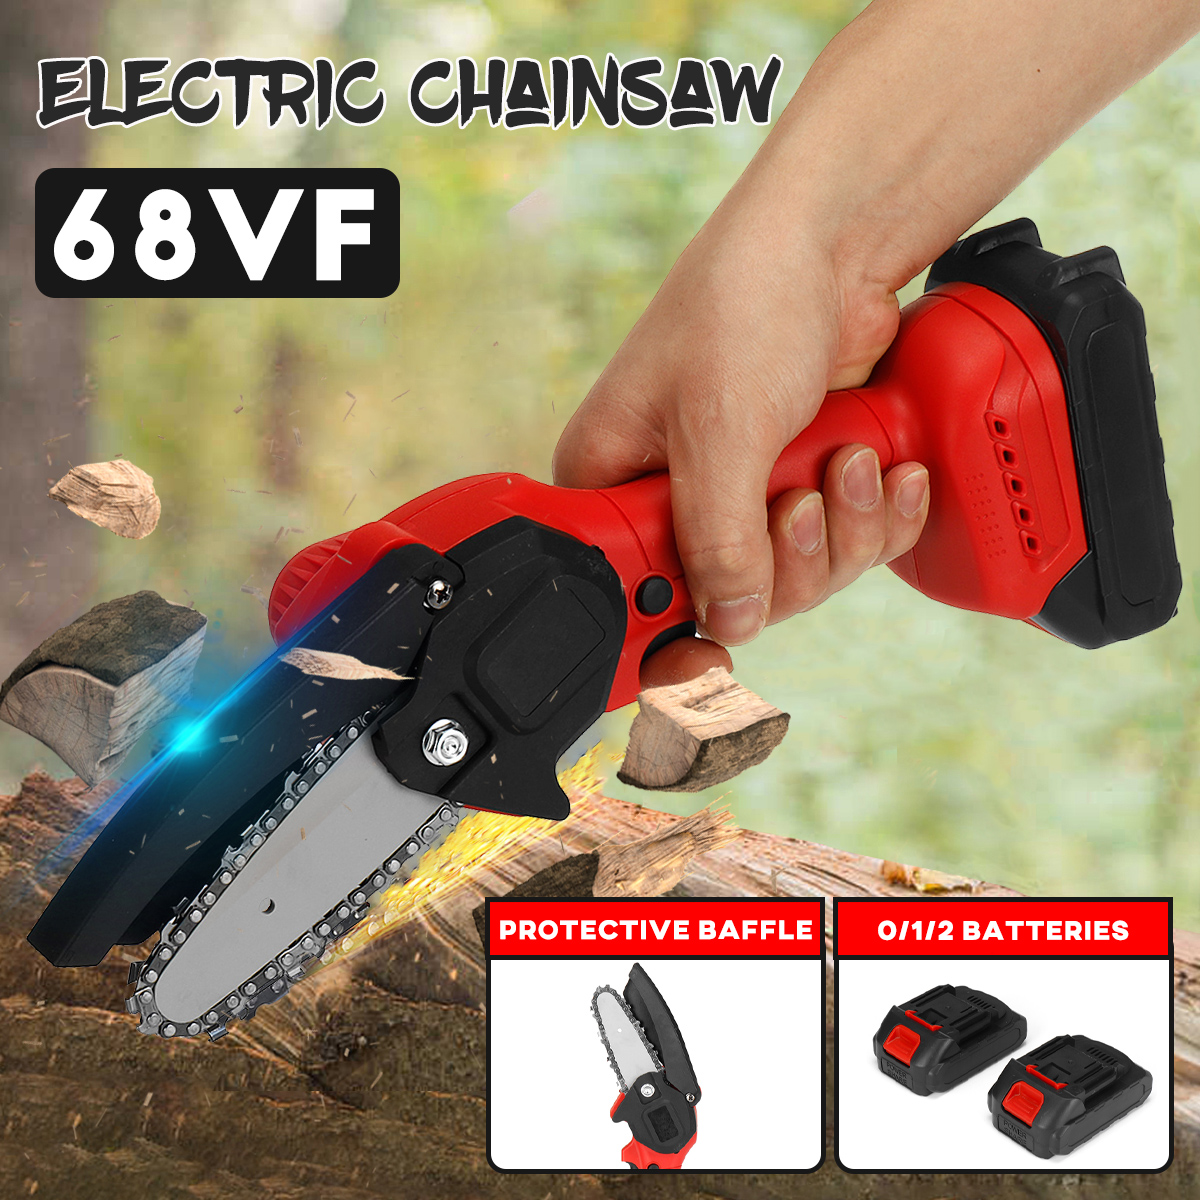 68VF-21V-4-Inch-Electric-Chainsaw-Cordless-Handheld-Rechargeable-Woodworking-Tool-W-None1pc2pcs-Batt-1843119-2